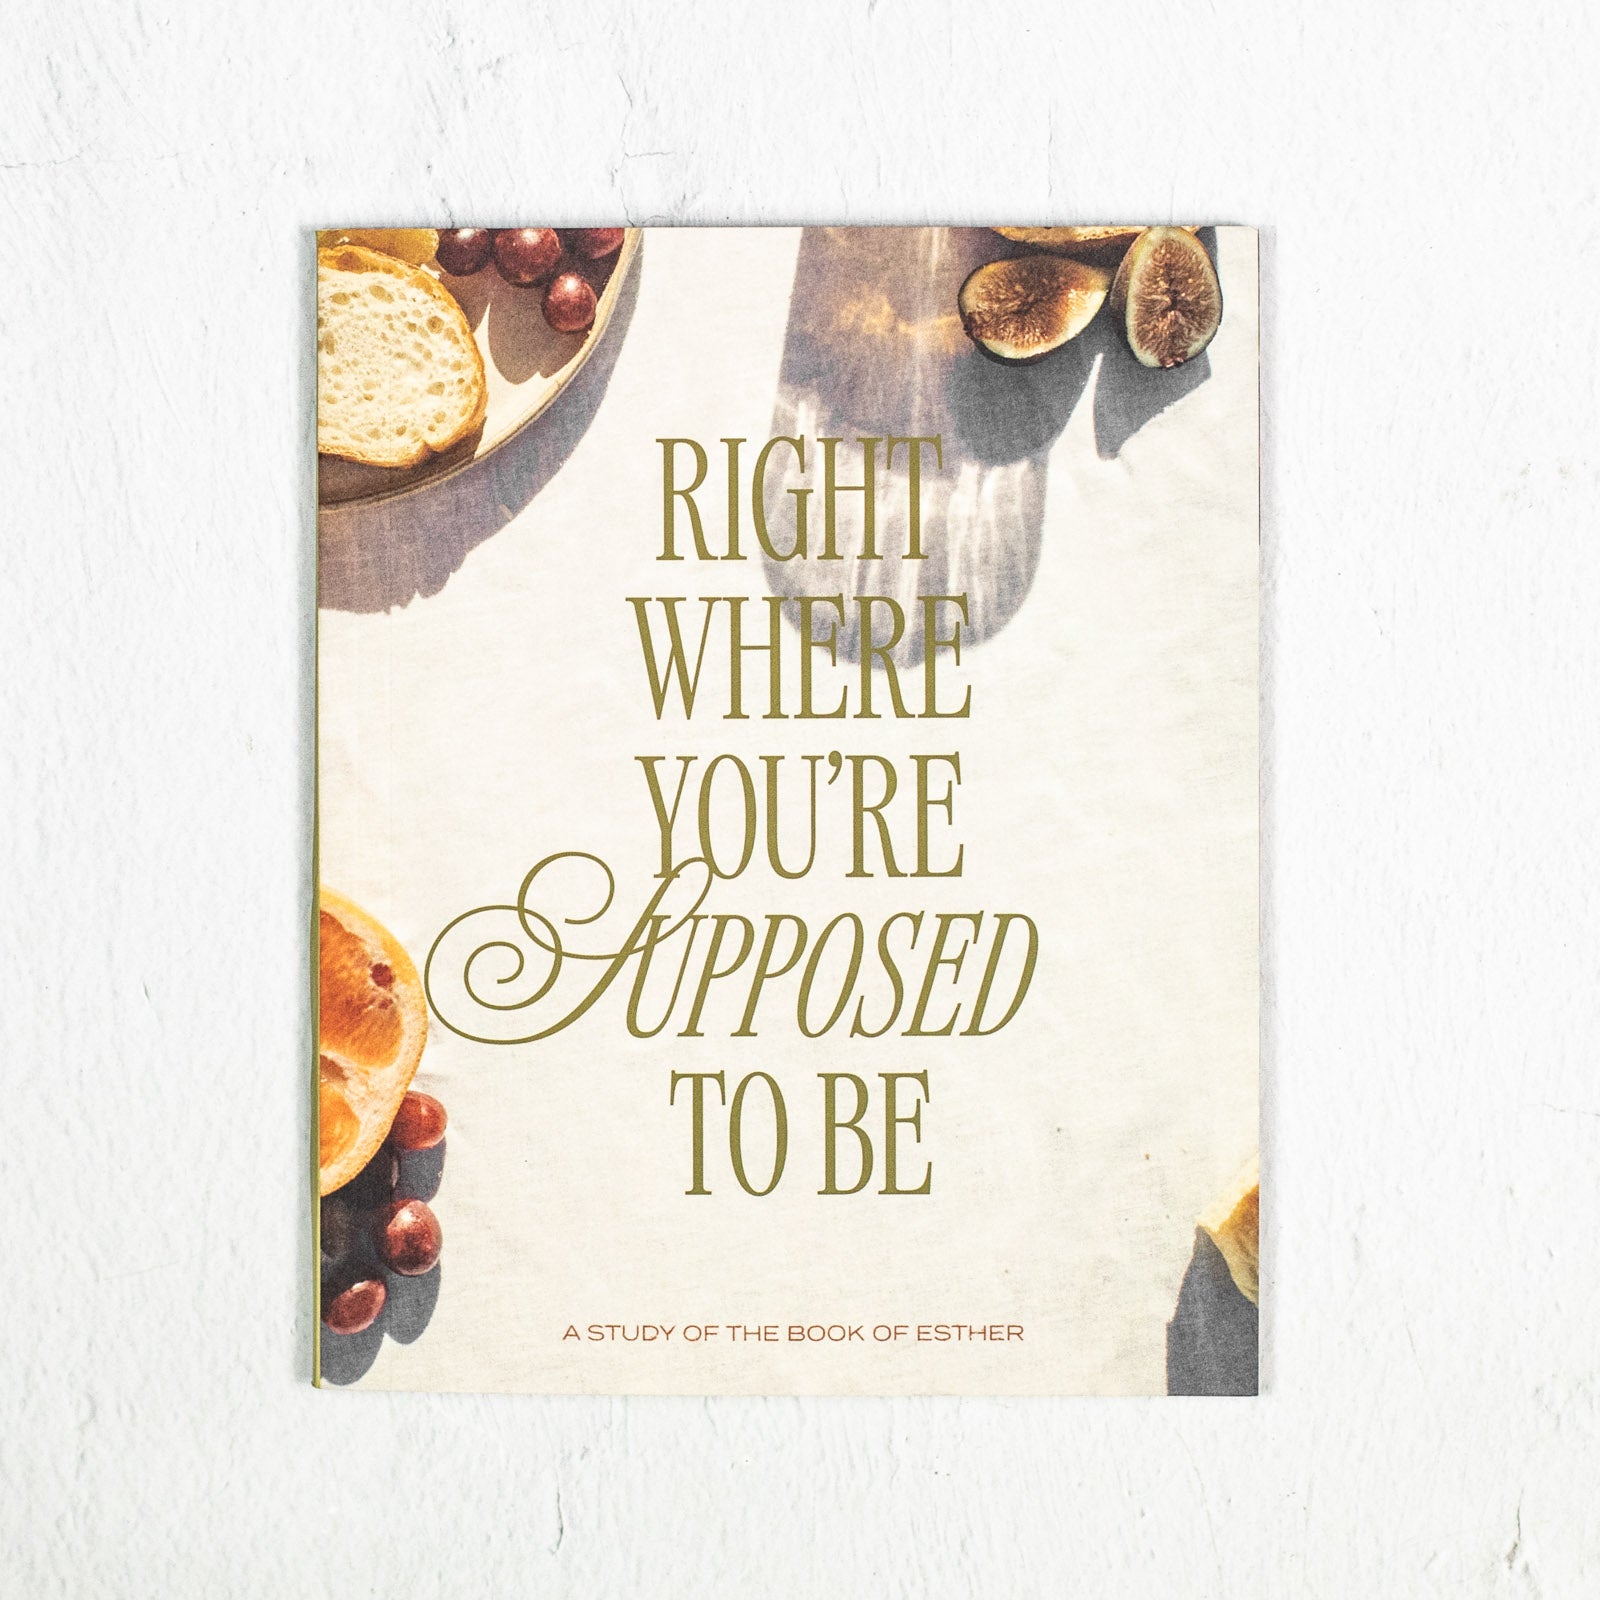 Right Where You’re Supposed To Be: A Study of the Book of Esther